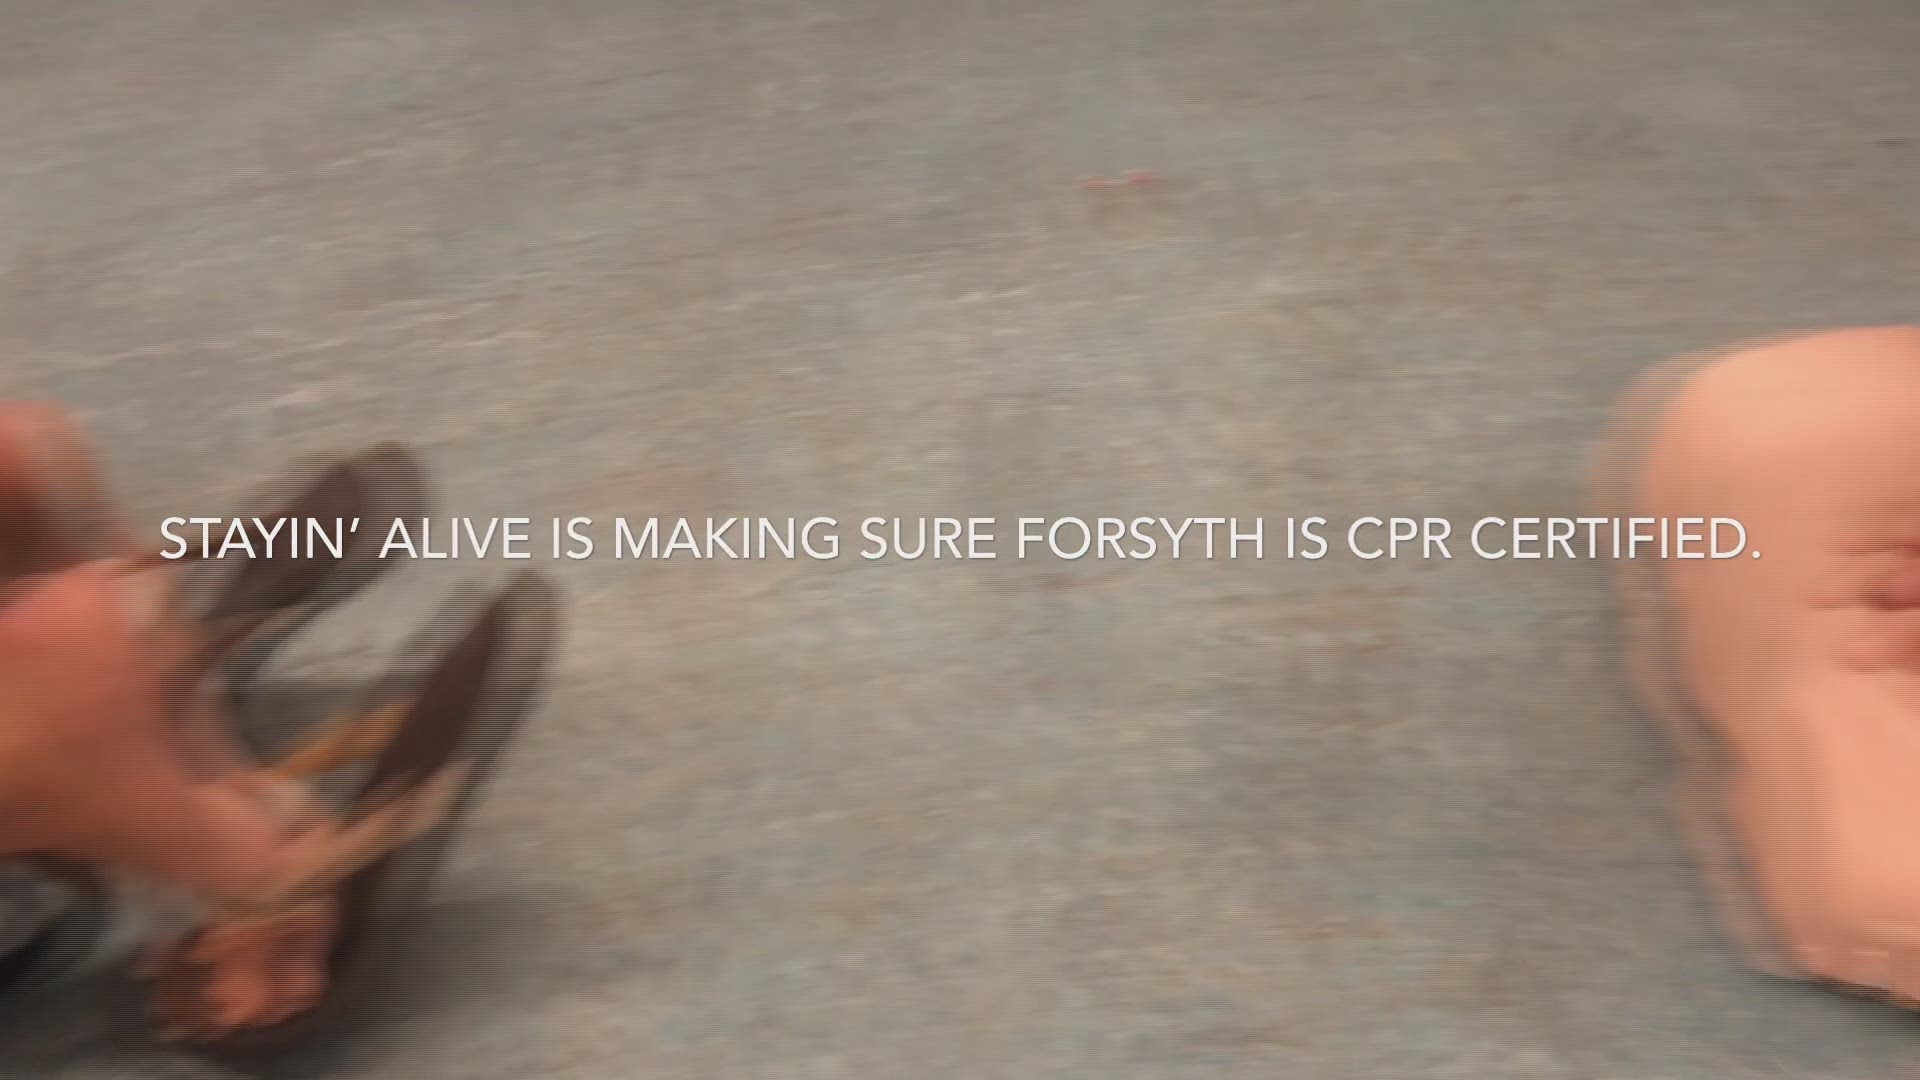 Video of Stayin' Alive CPR & First Aid class in Forsyth County.